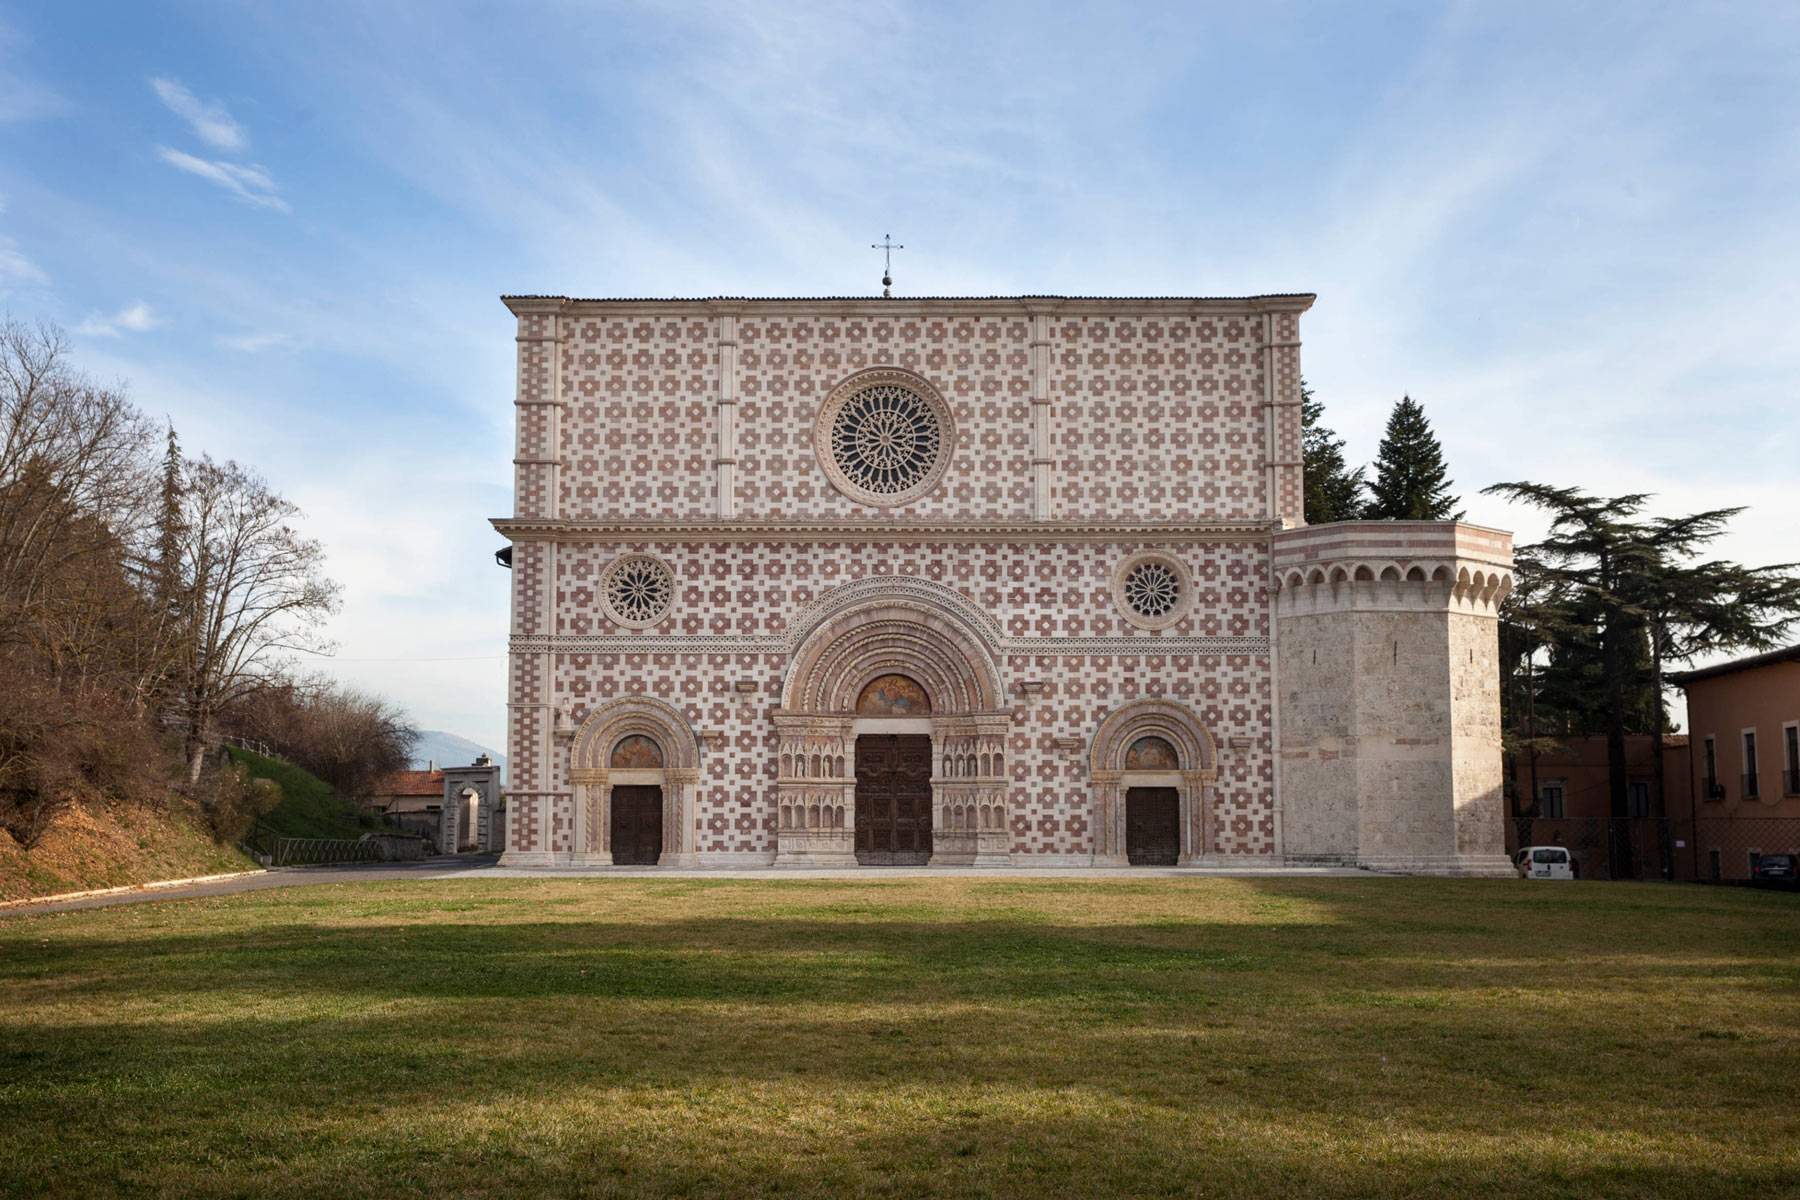 L'Aquila on the roof of Europe: Collemaggio wins Grand Prix for best restoration